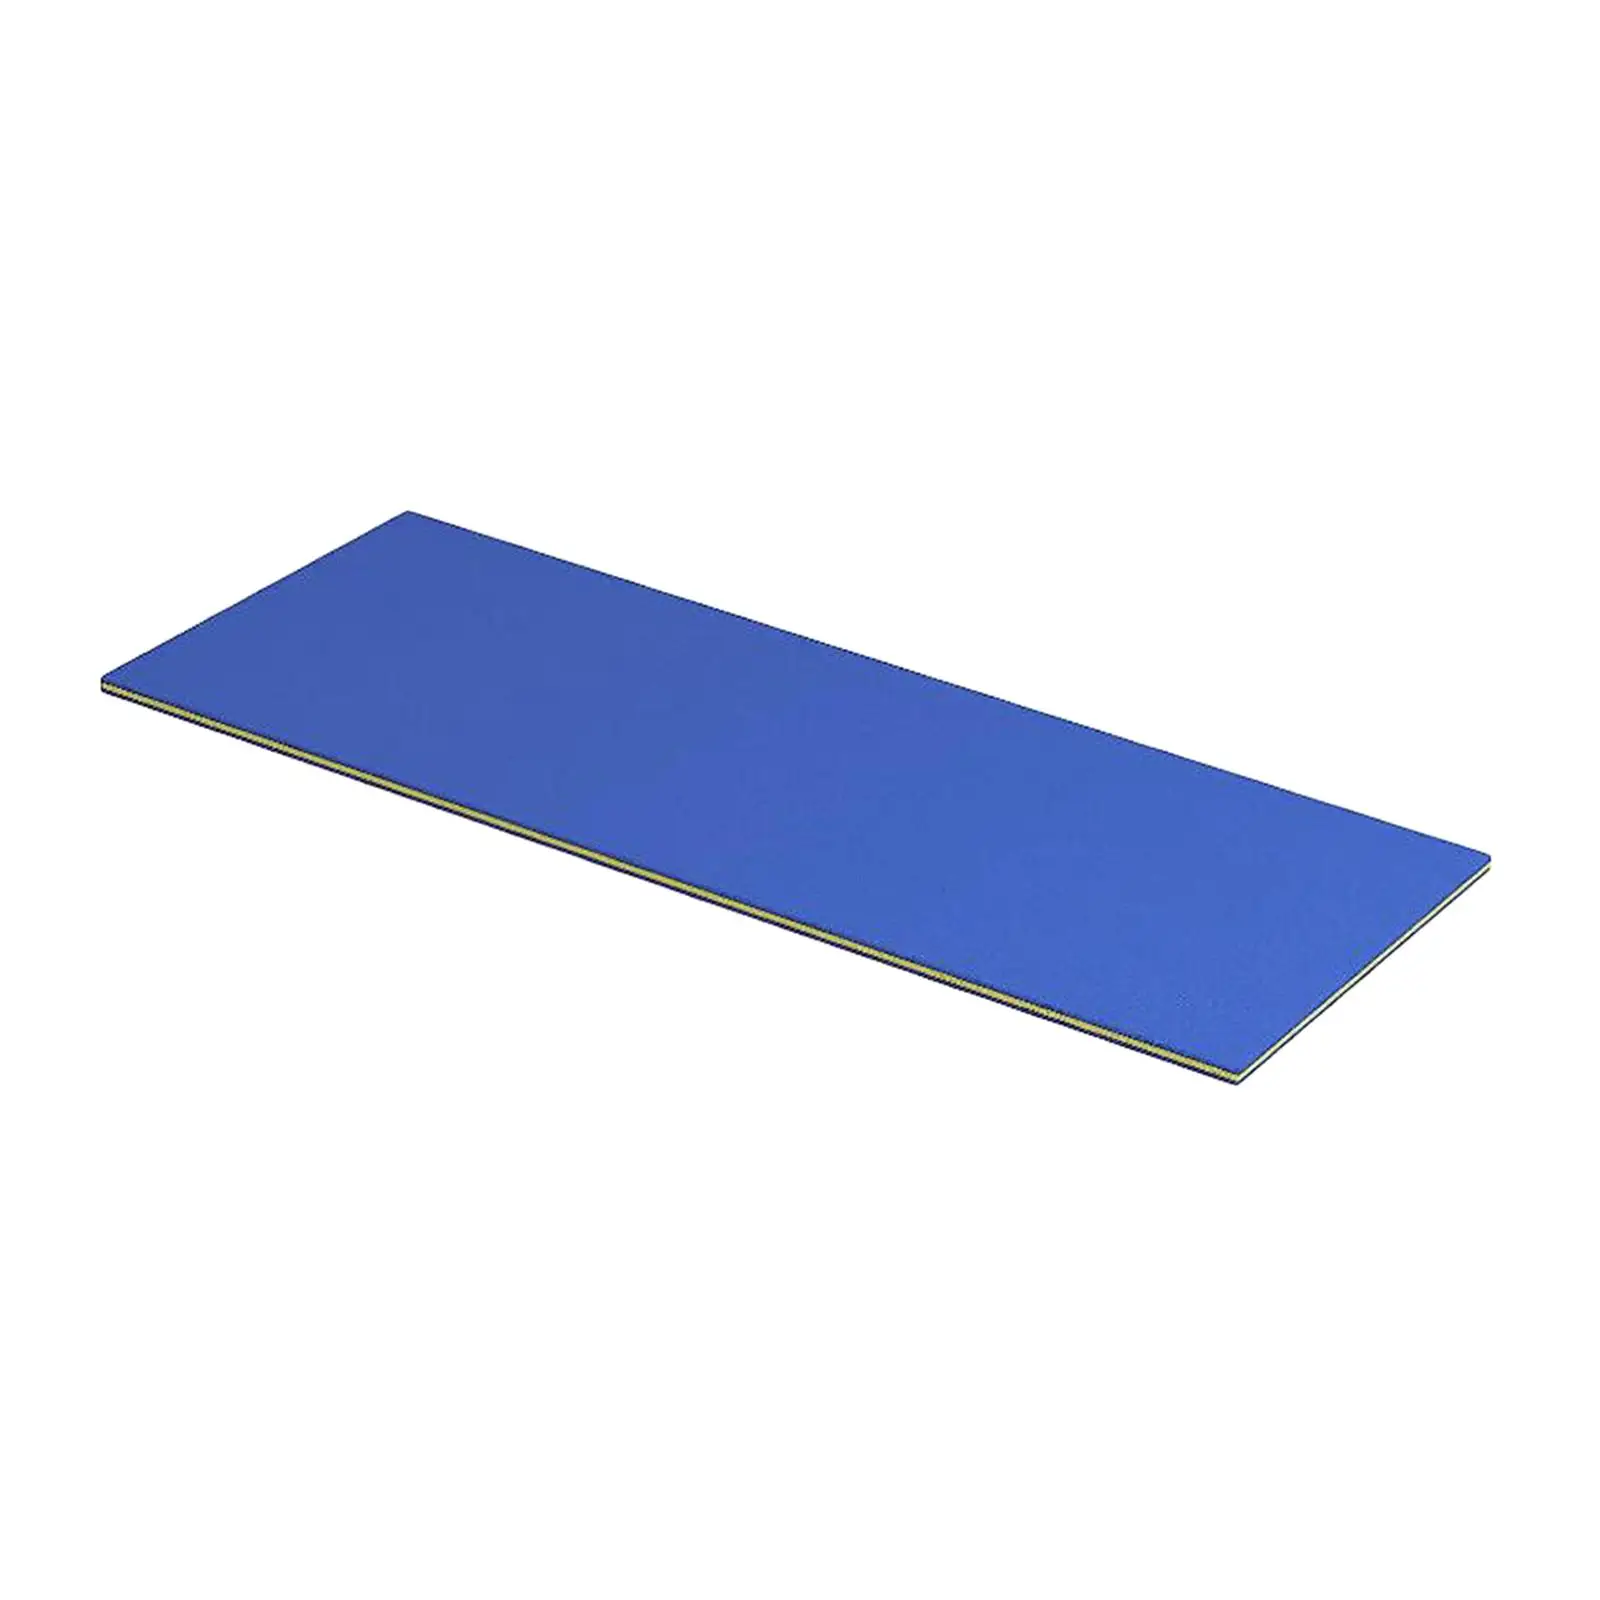 Pool Floating Water Mat Water Raft 3 Layer Water Bed 180x55x3.3cm Durable Xpe